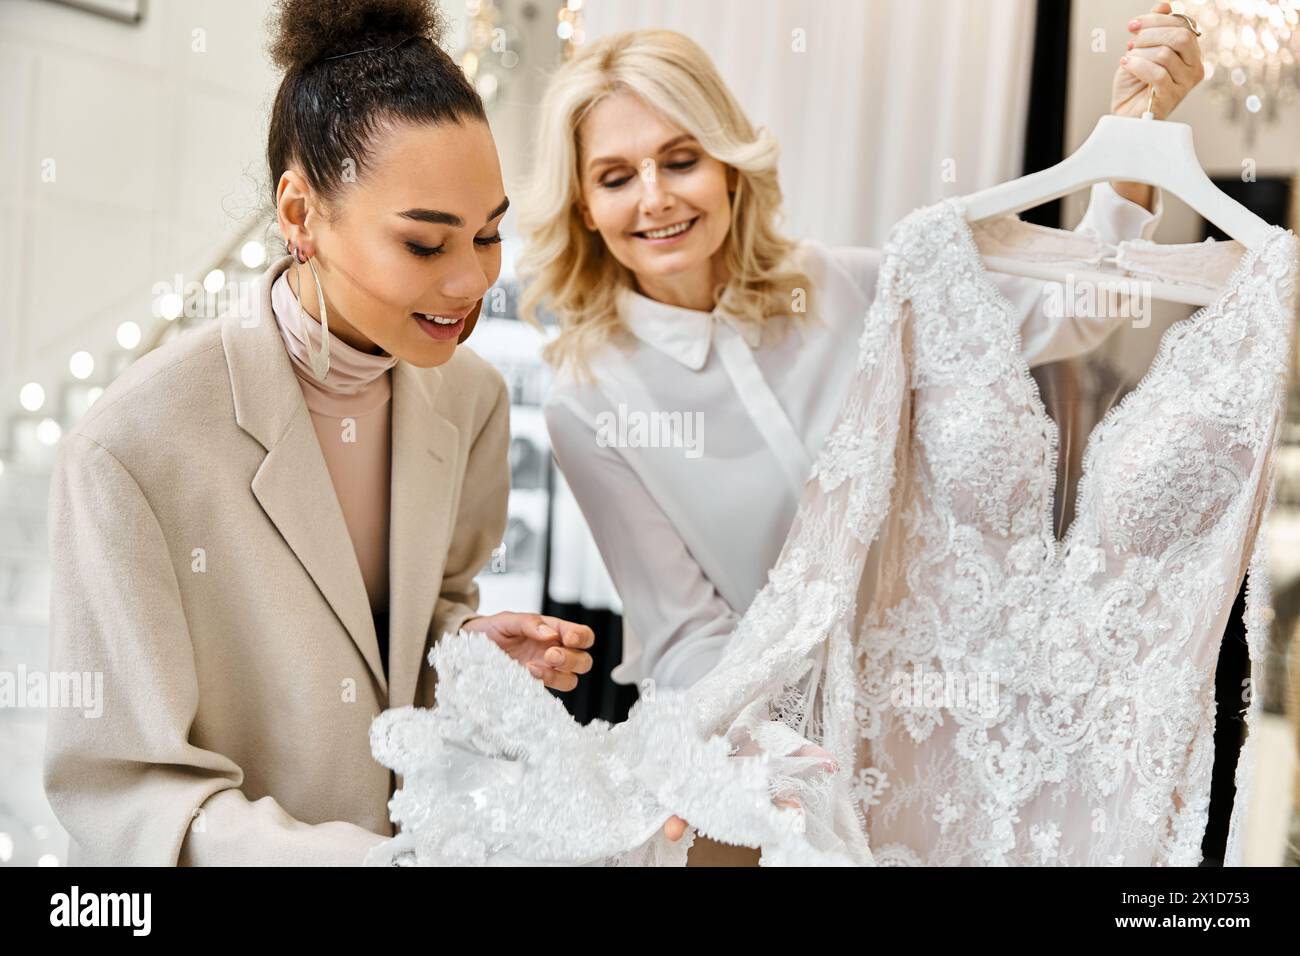 Two women admiring a white gown on a hanger in a bridal shop. The bride-to-be and shop assistant are discussing the dress. Stock Photo